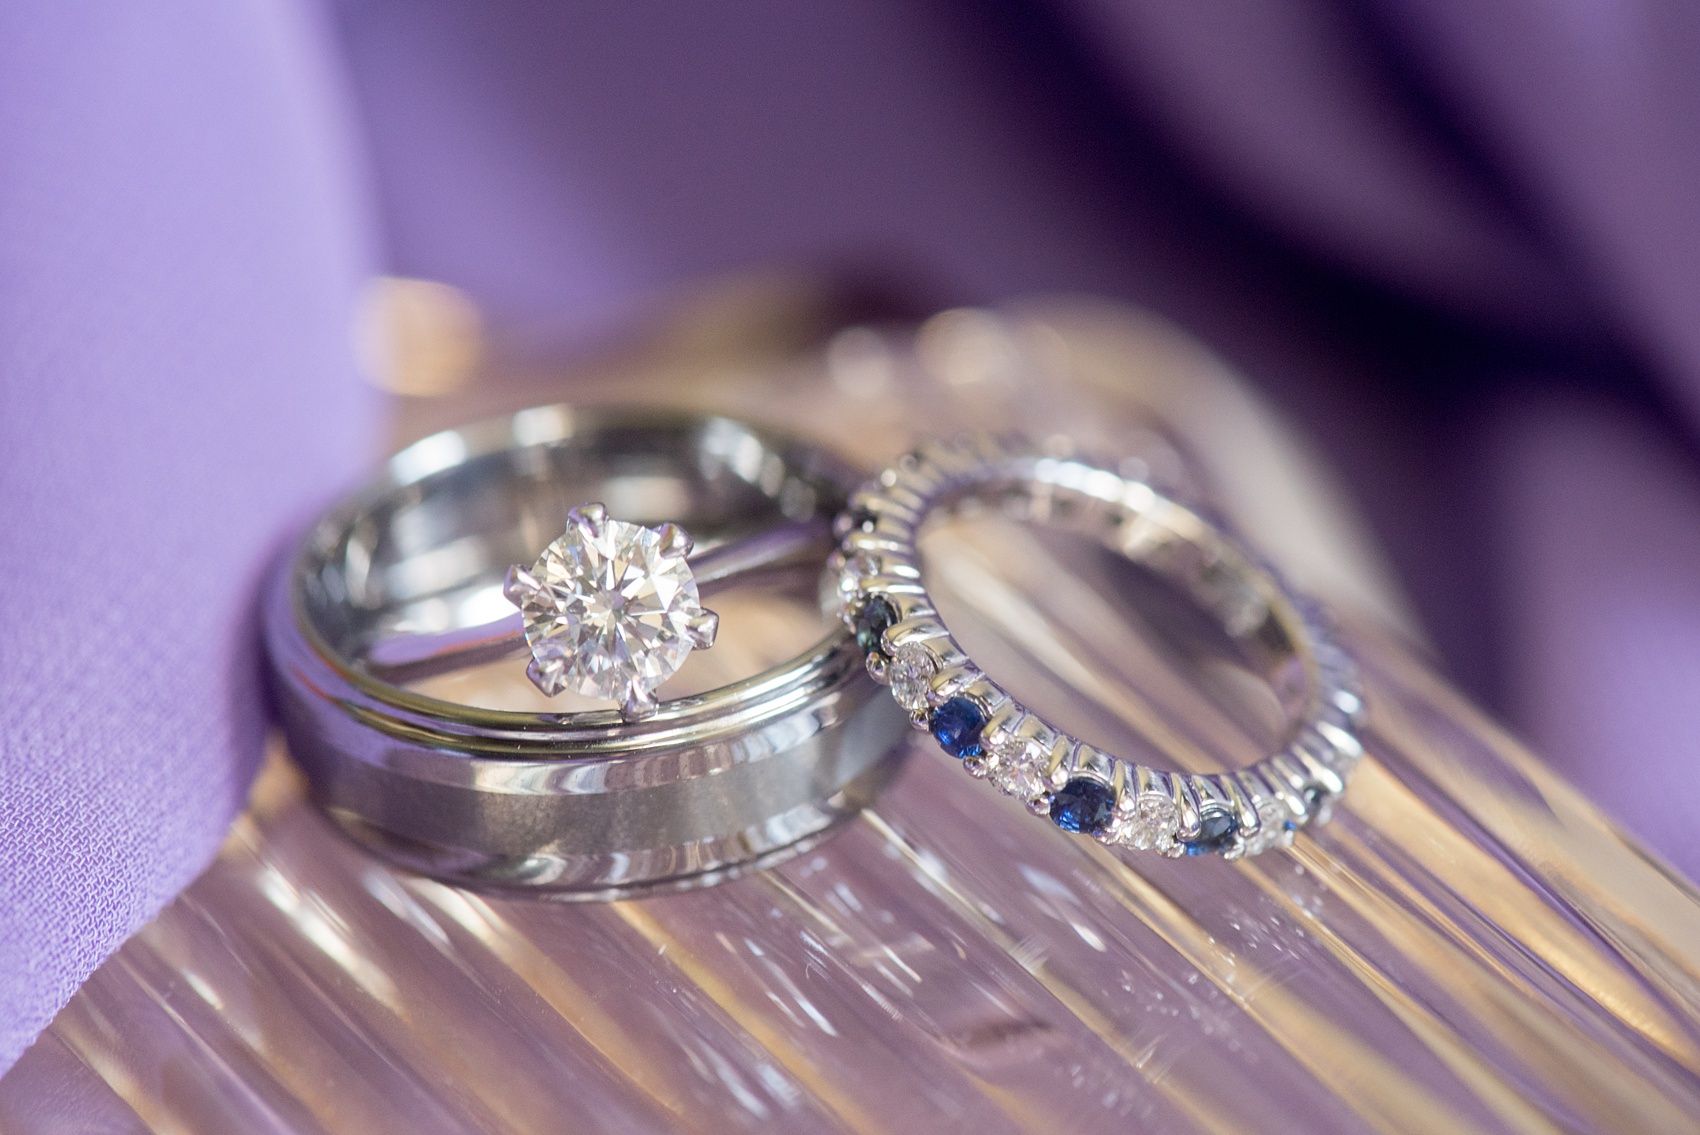 Mikkel Paige Photography wedding photos at The Fox Hollow, Long Island. Detail picture of the rings, including a sapphire and diamond wedding band.